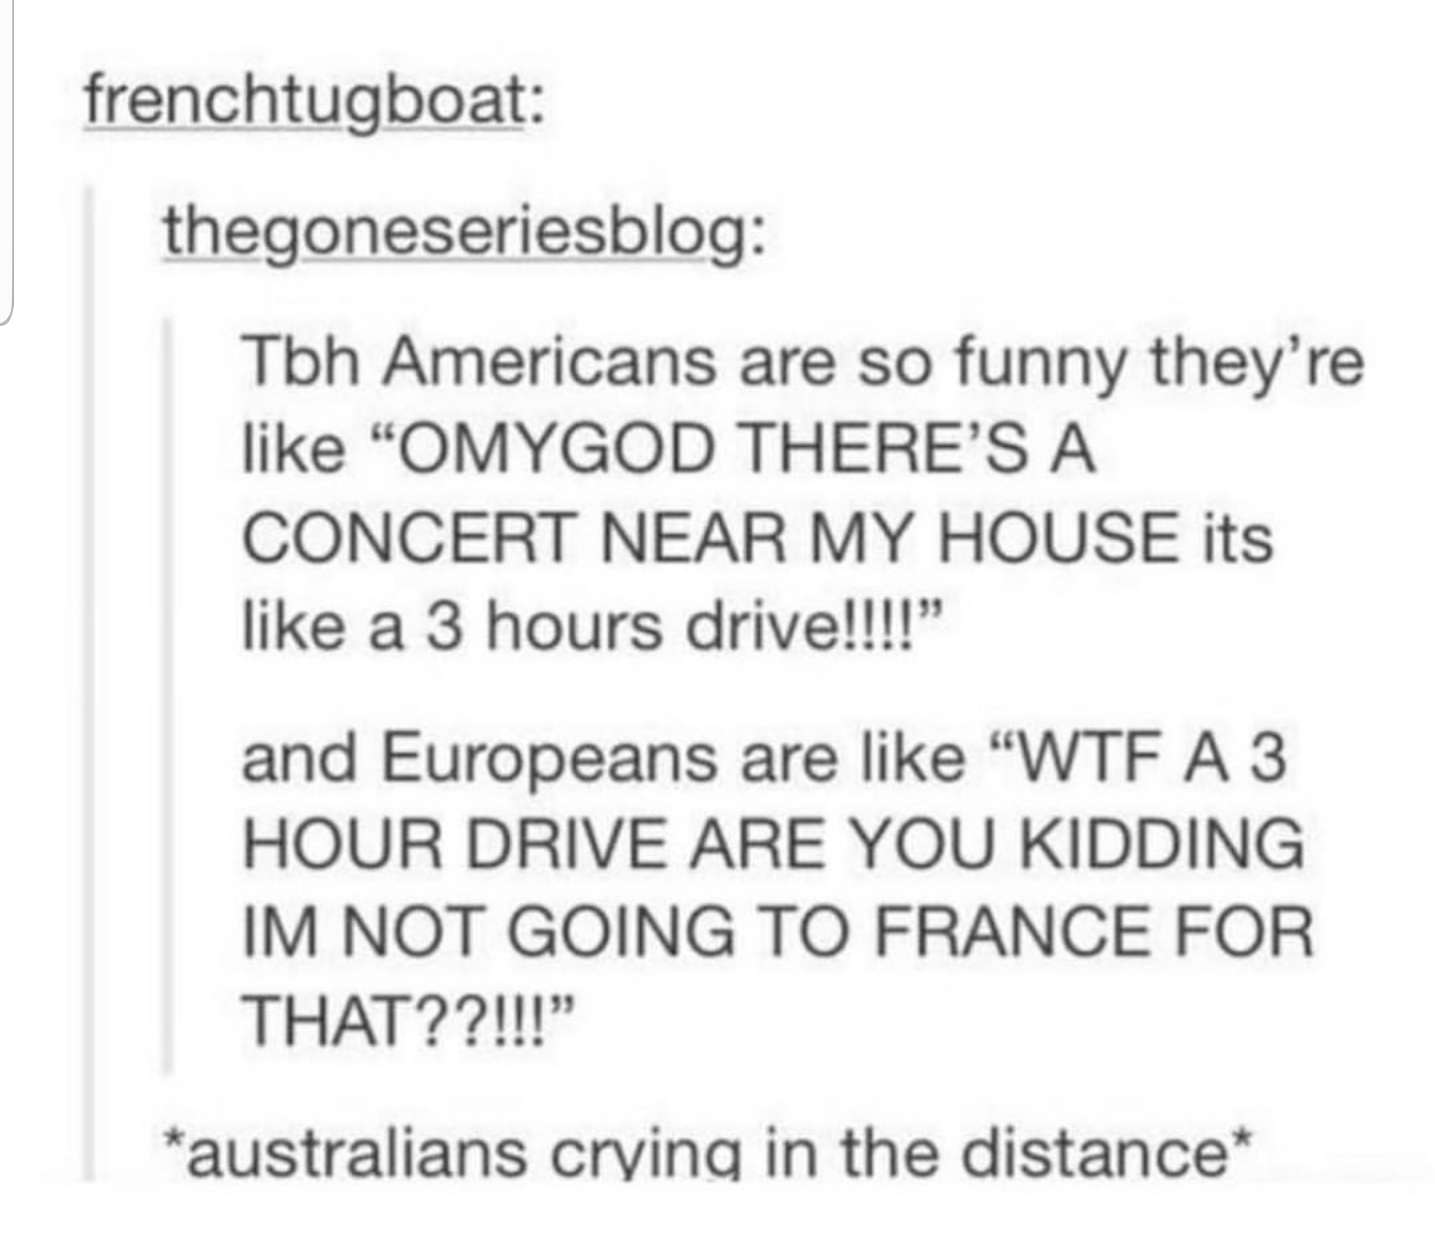 &quot;*australians crying in the distance*&quot;